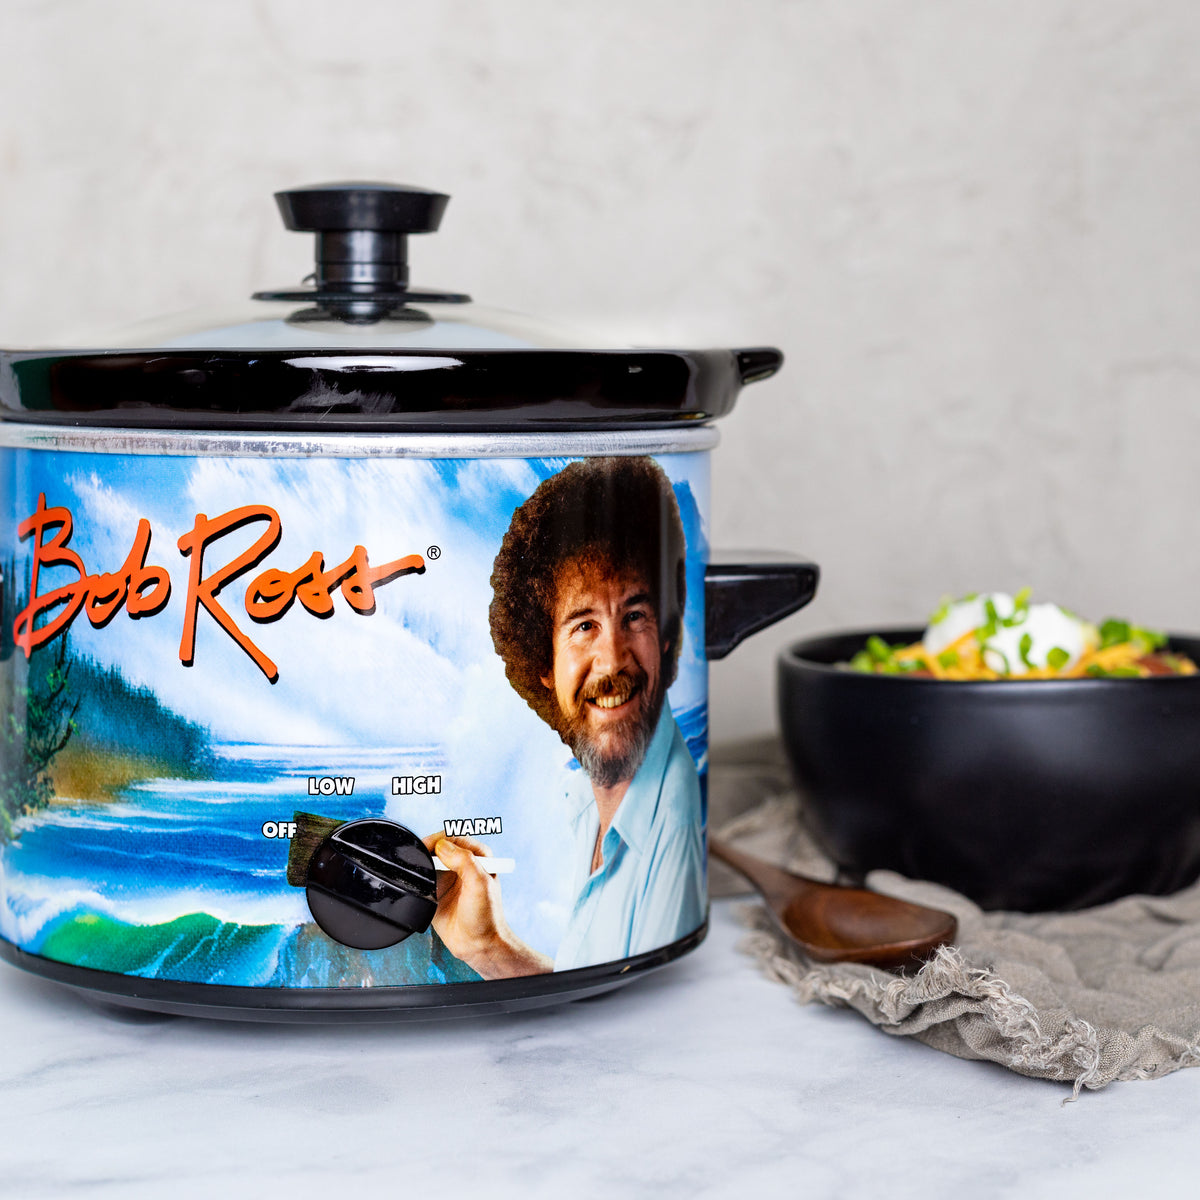 Bob Ross slow cooker in focus, bowl of chili in the background